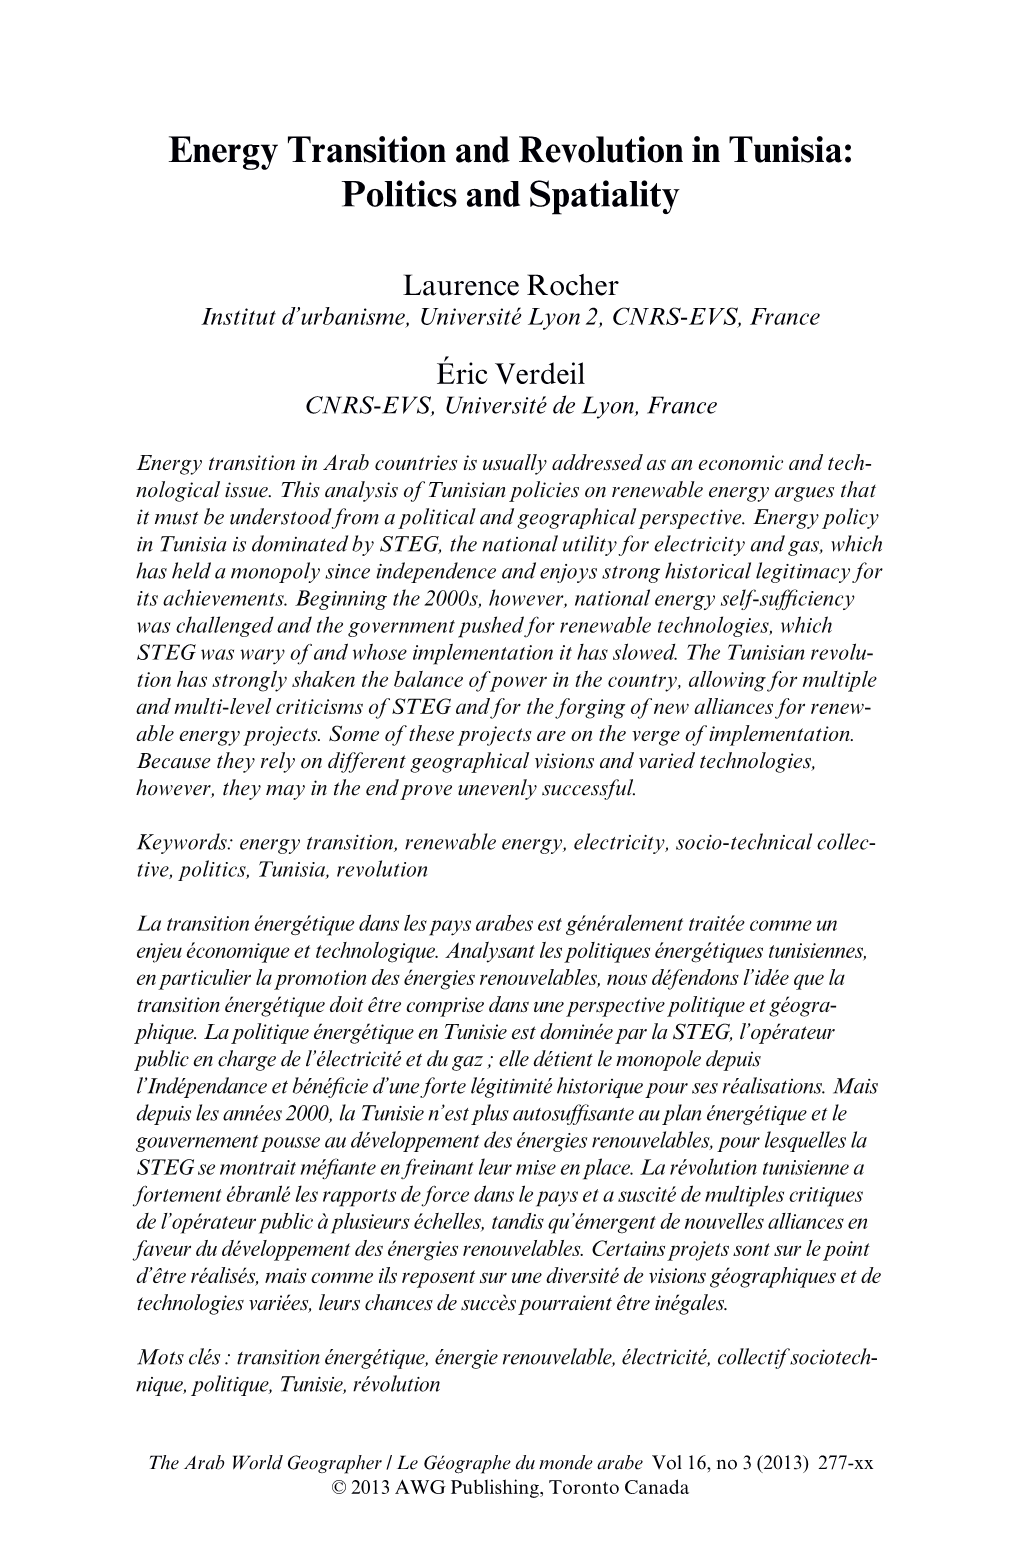 Energy Transition and Revolution in Tunisia: Politics and Spatiality